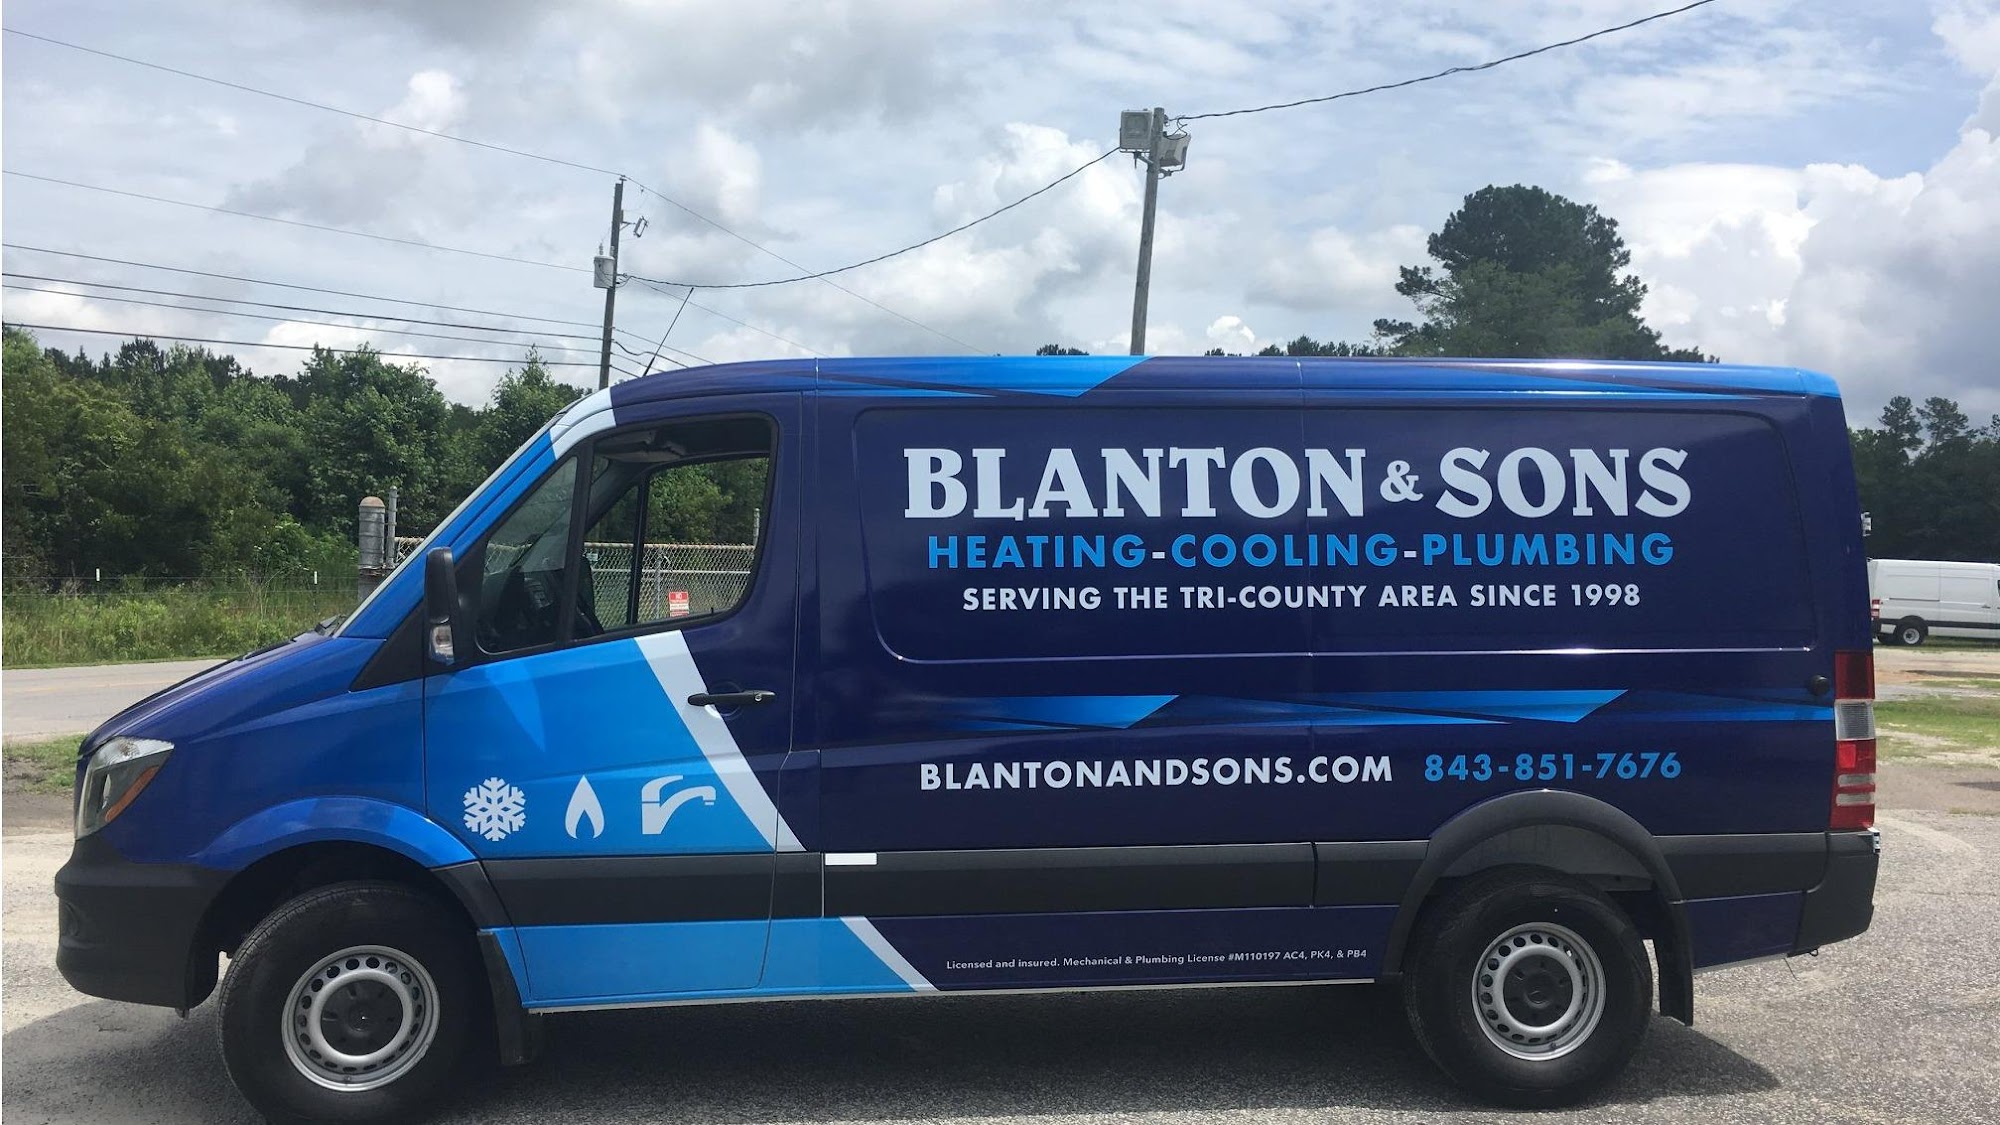 Blanton & Sons - Heating, Cooling and Plumbing